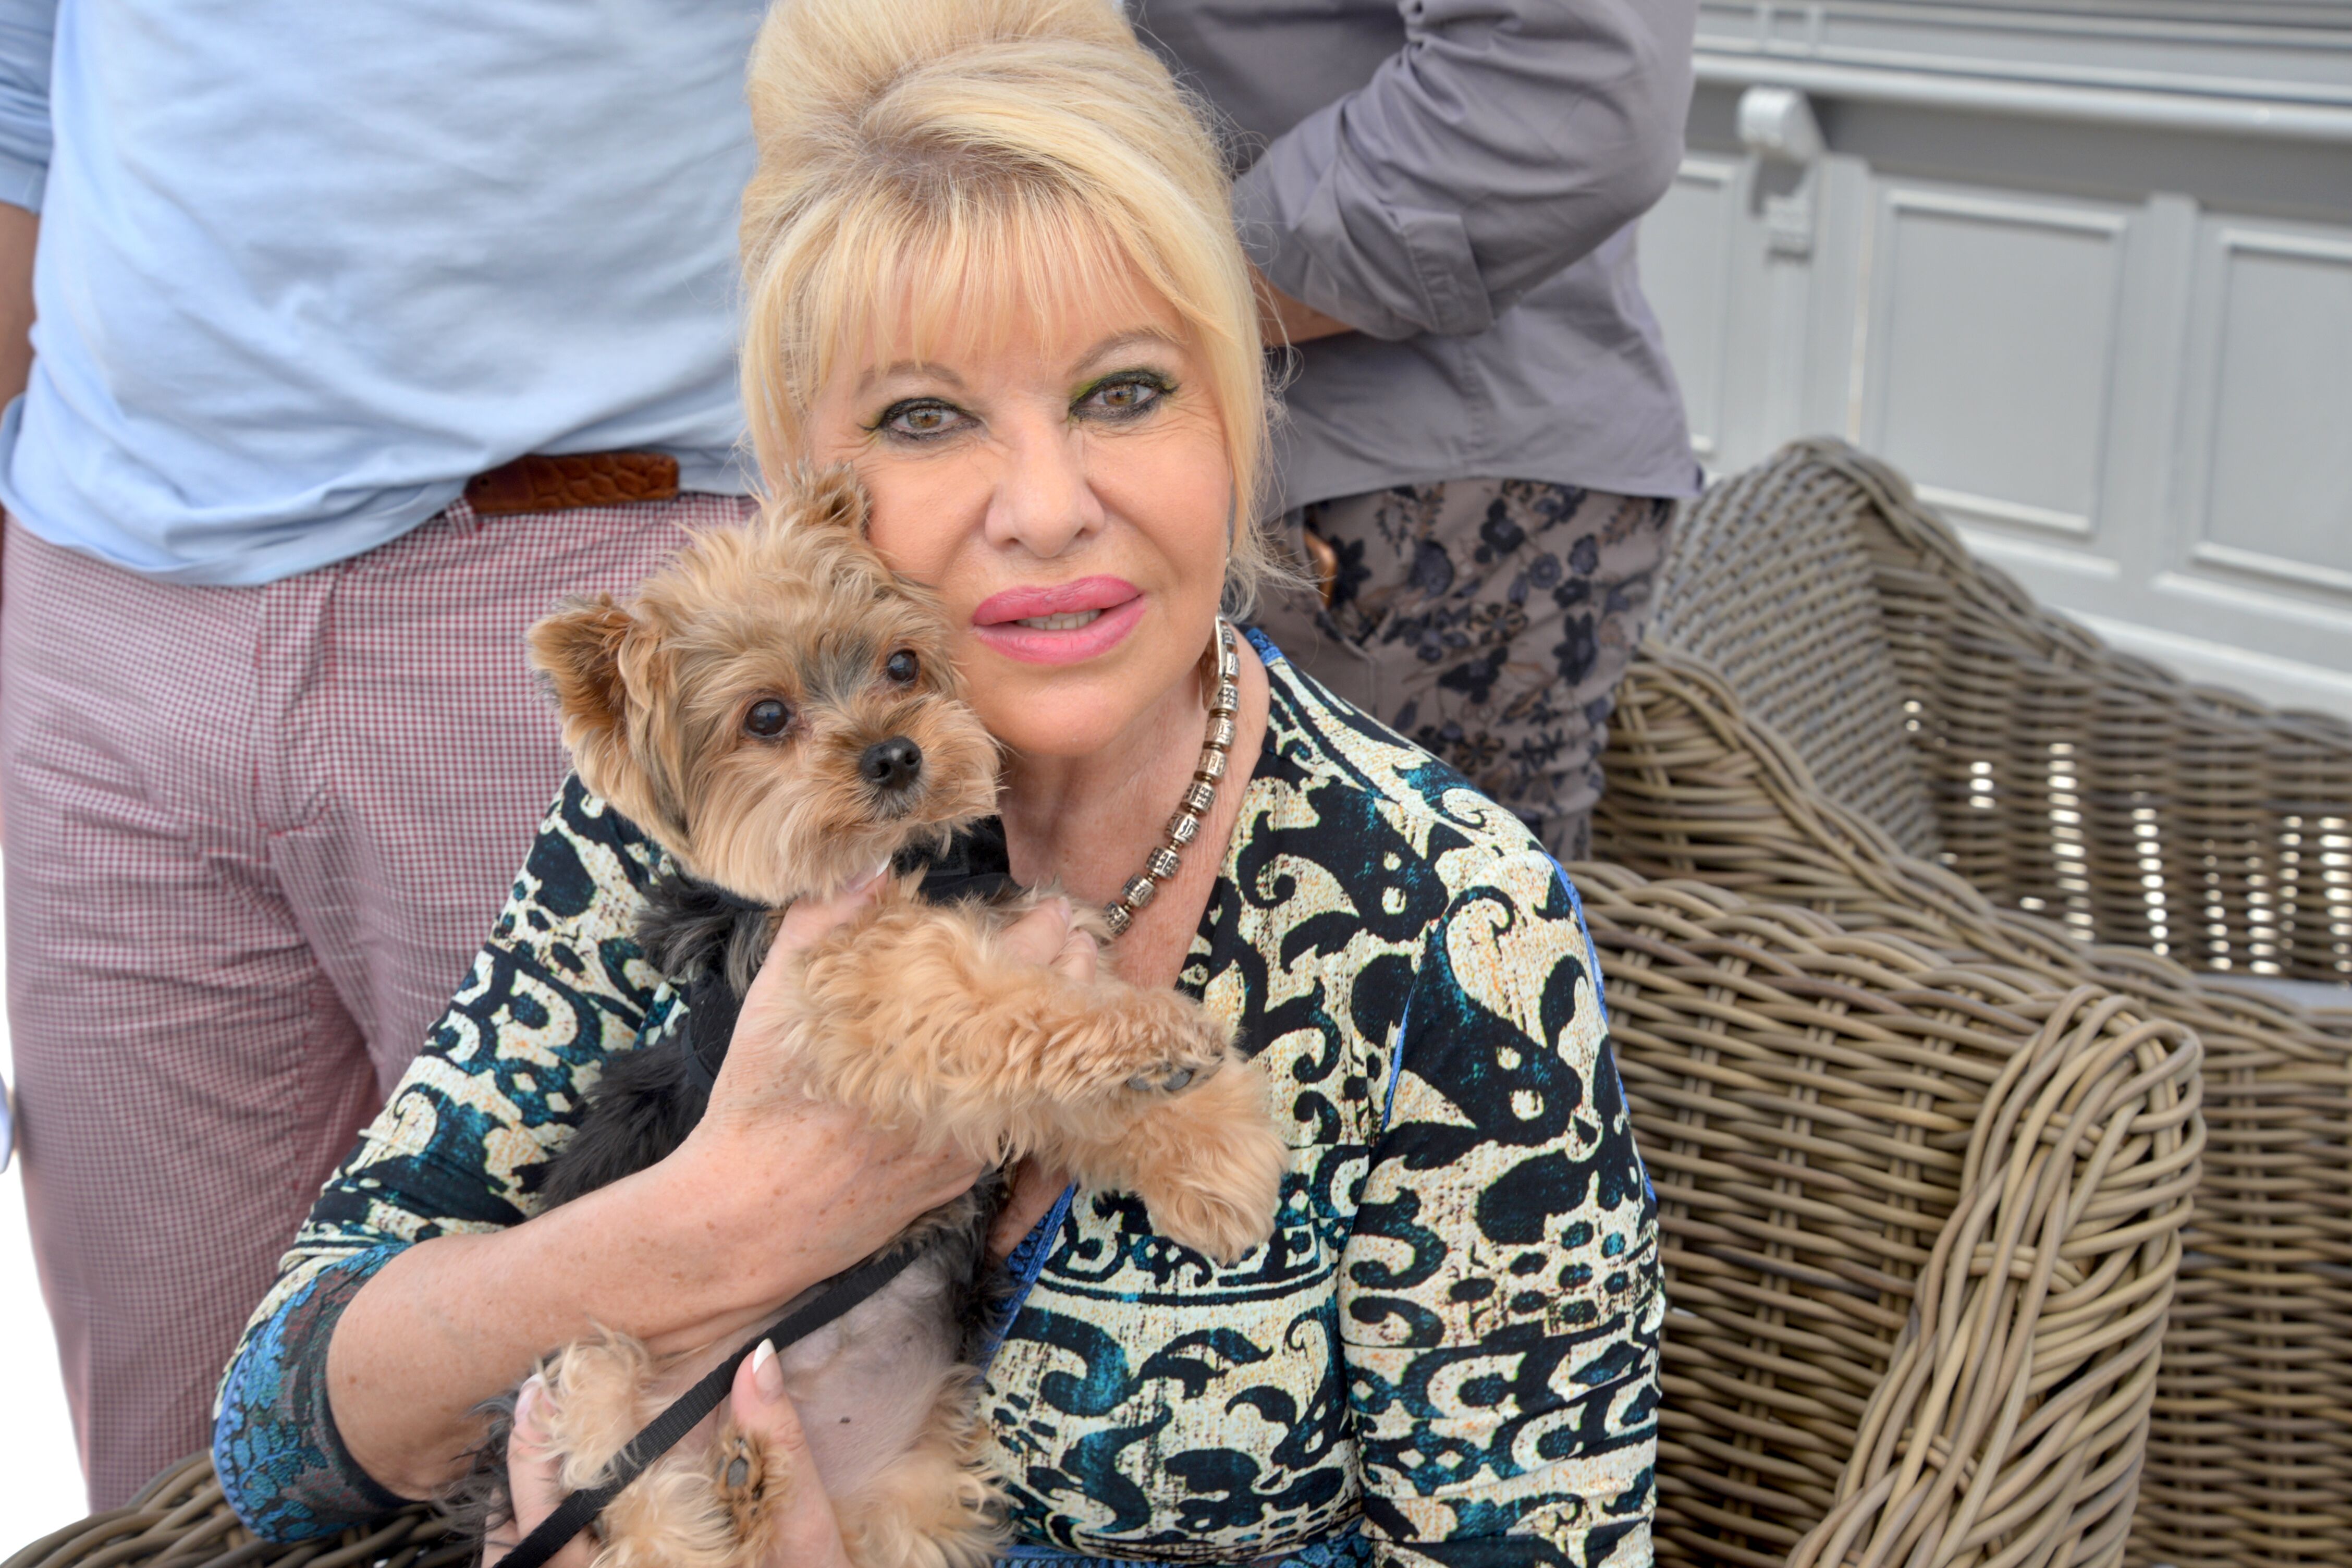 Ivana Trump sighted at The Deck at The Island Gardens on March 6, 2016 in Miami, Florida. | Source: Getty Images